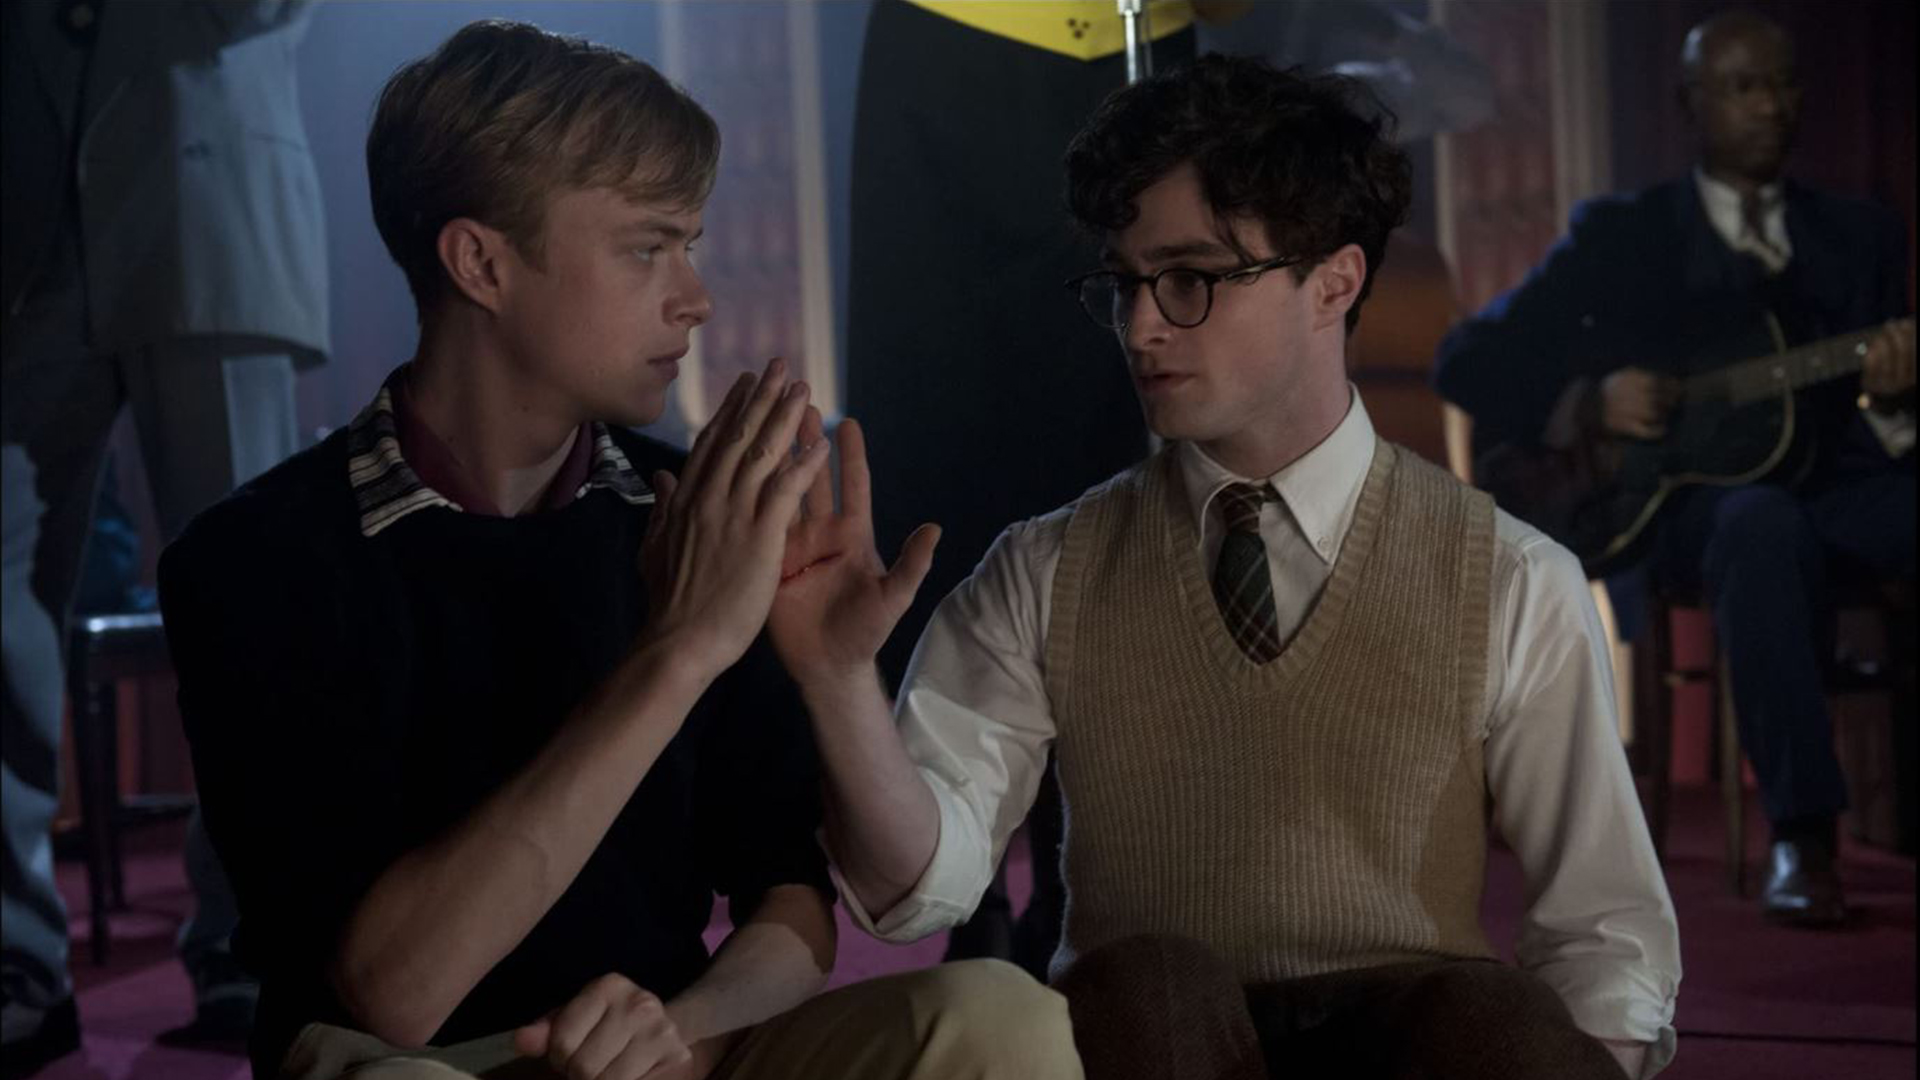 Lucien and Allen make a blood oath in a jazz club in this image from Sony Pictures Classics.